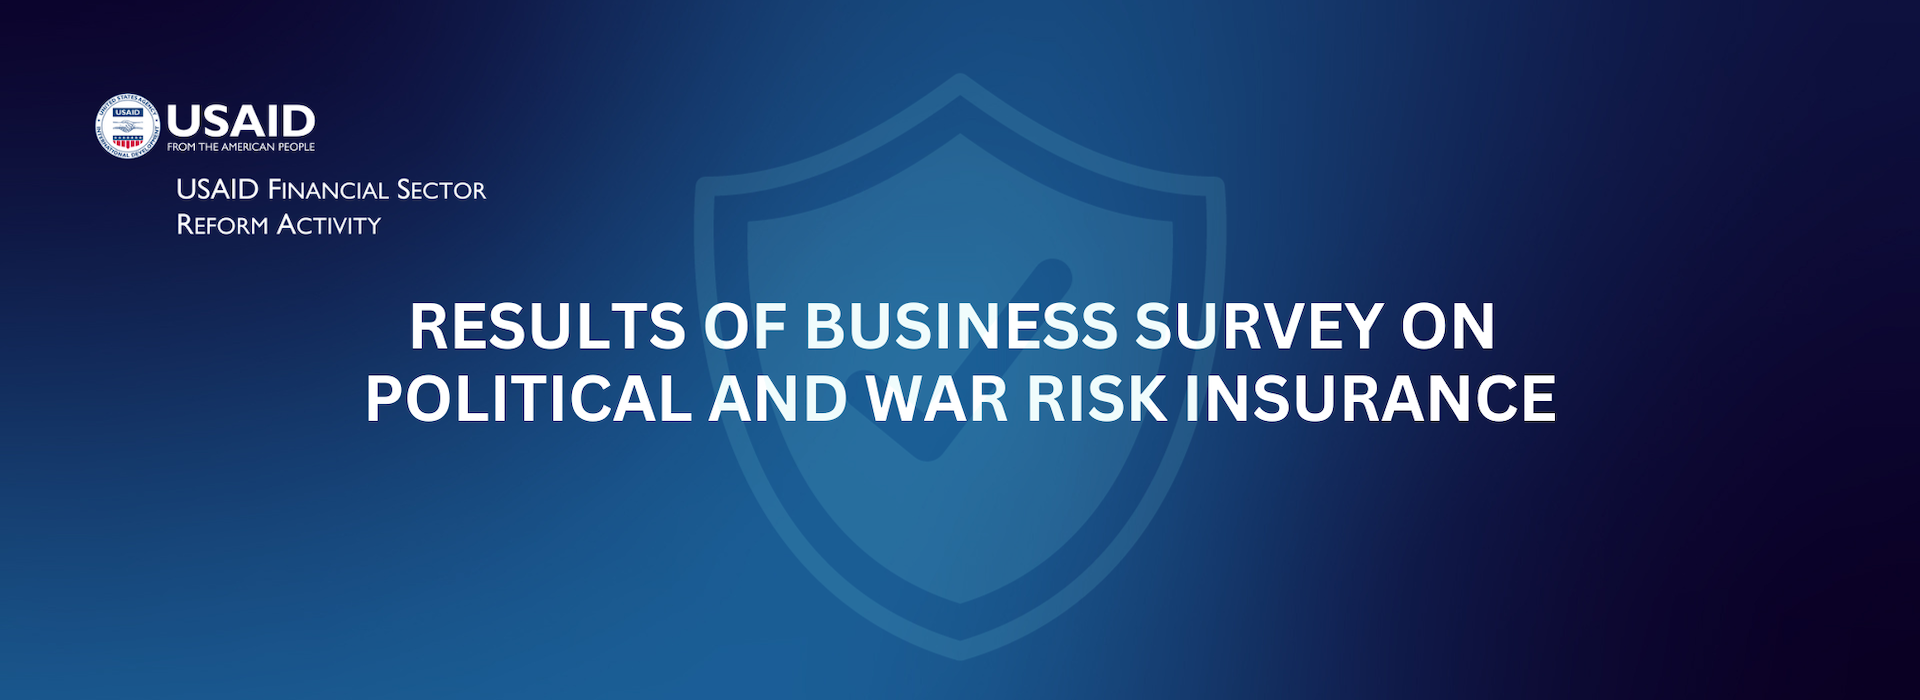 Survey Results: Business Needs Political and War Risk Insurance on a Regular Basis